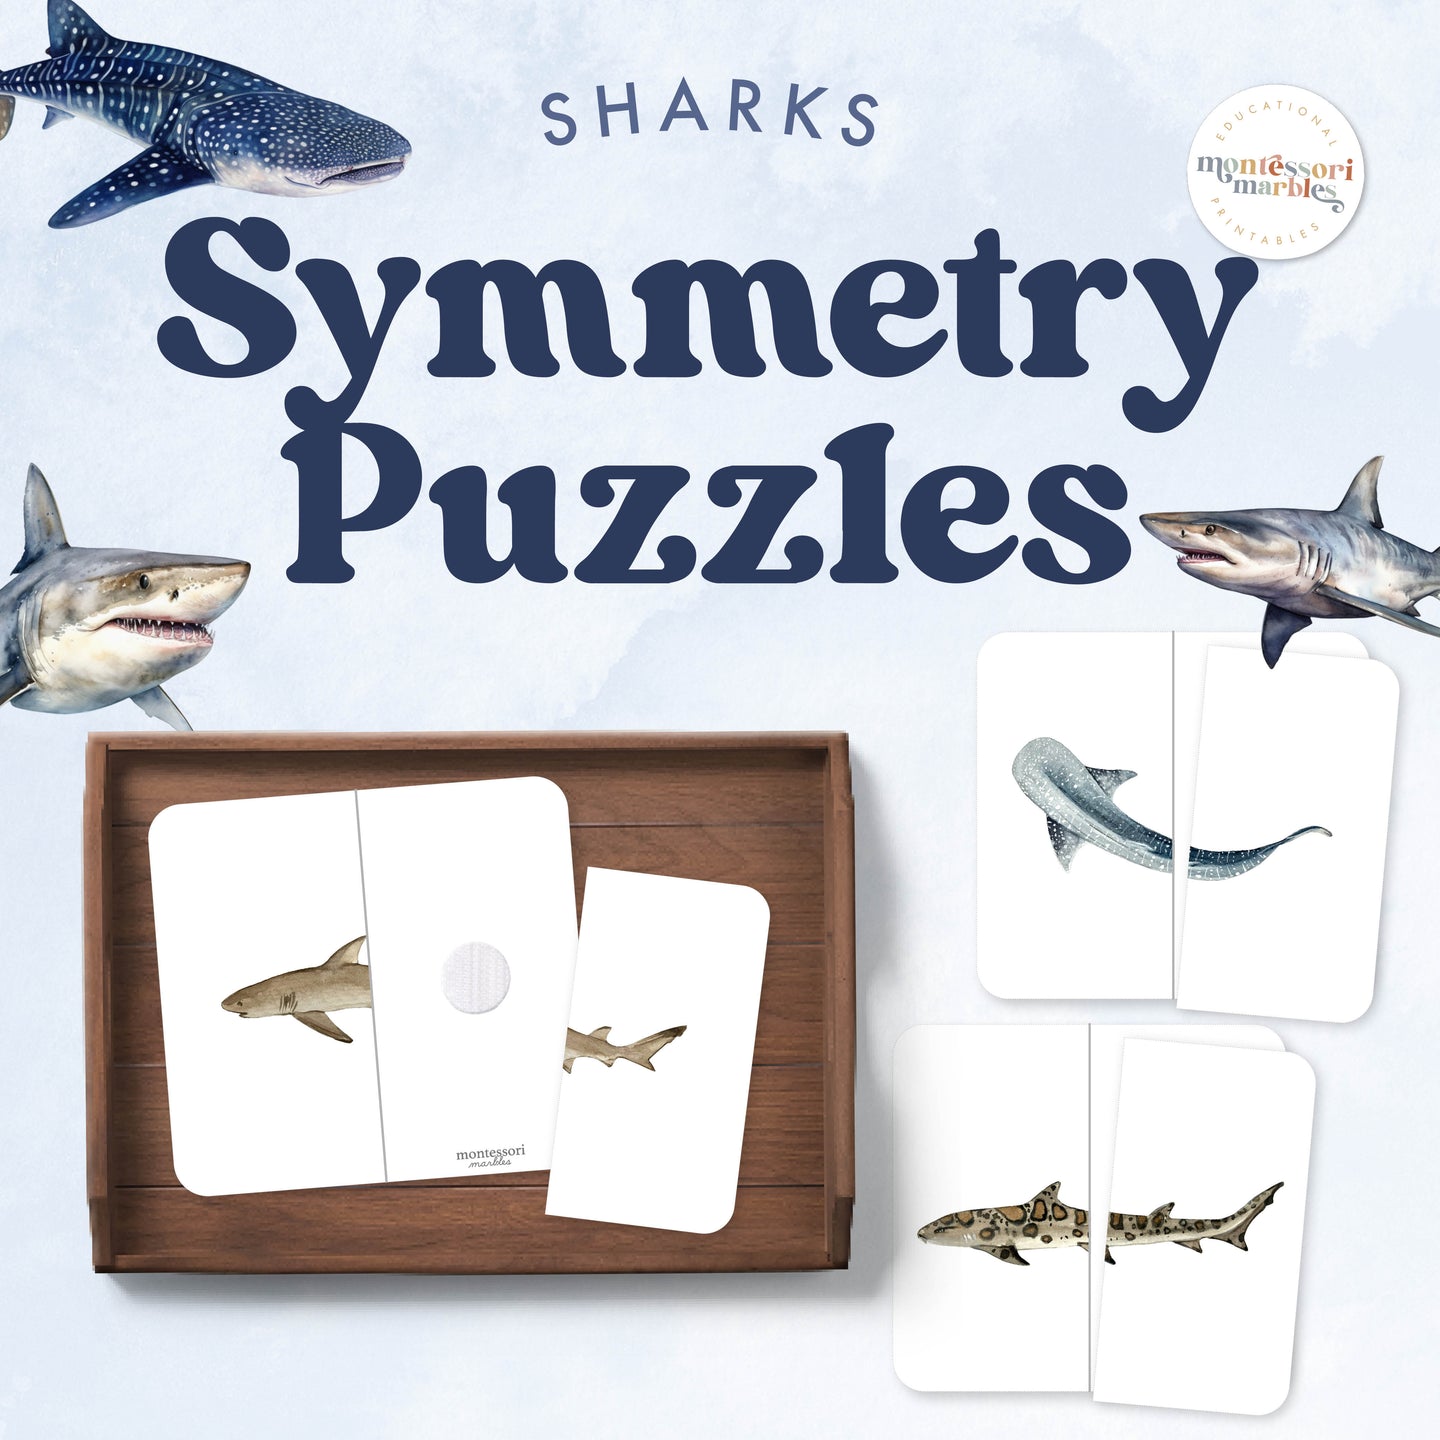 Sharks Symmetry Puzzles